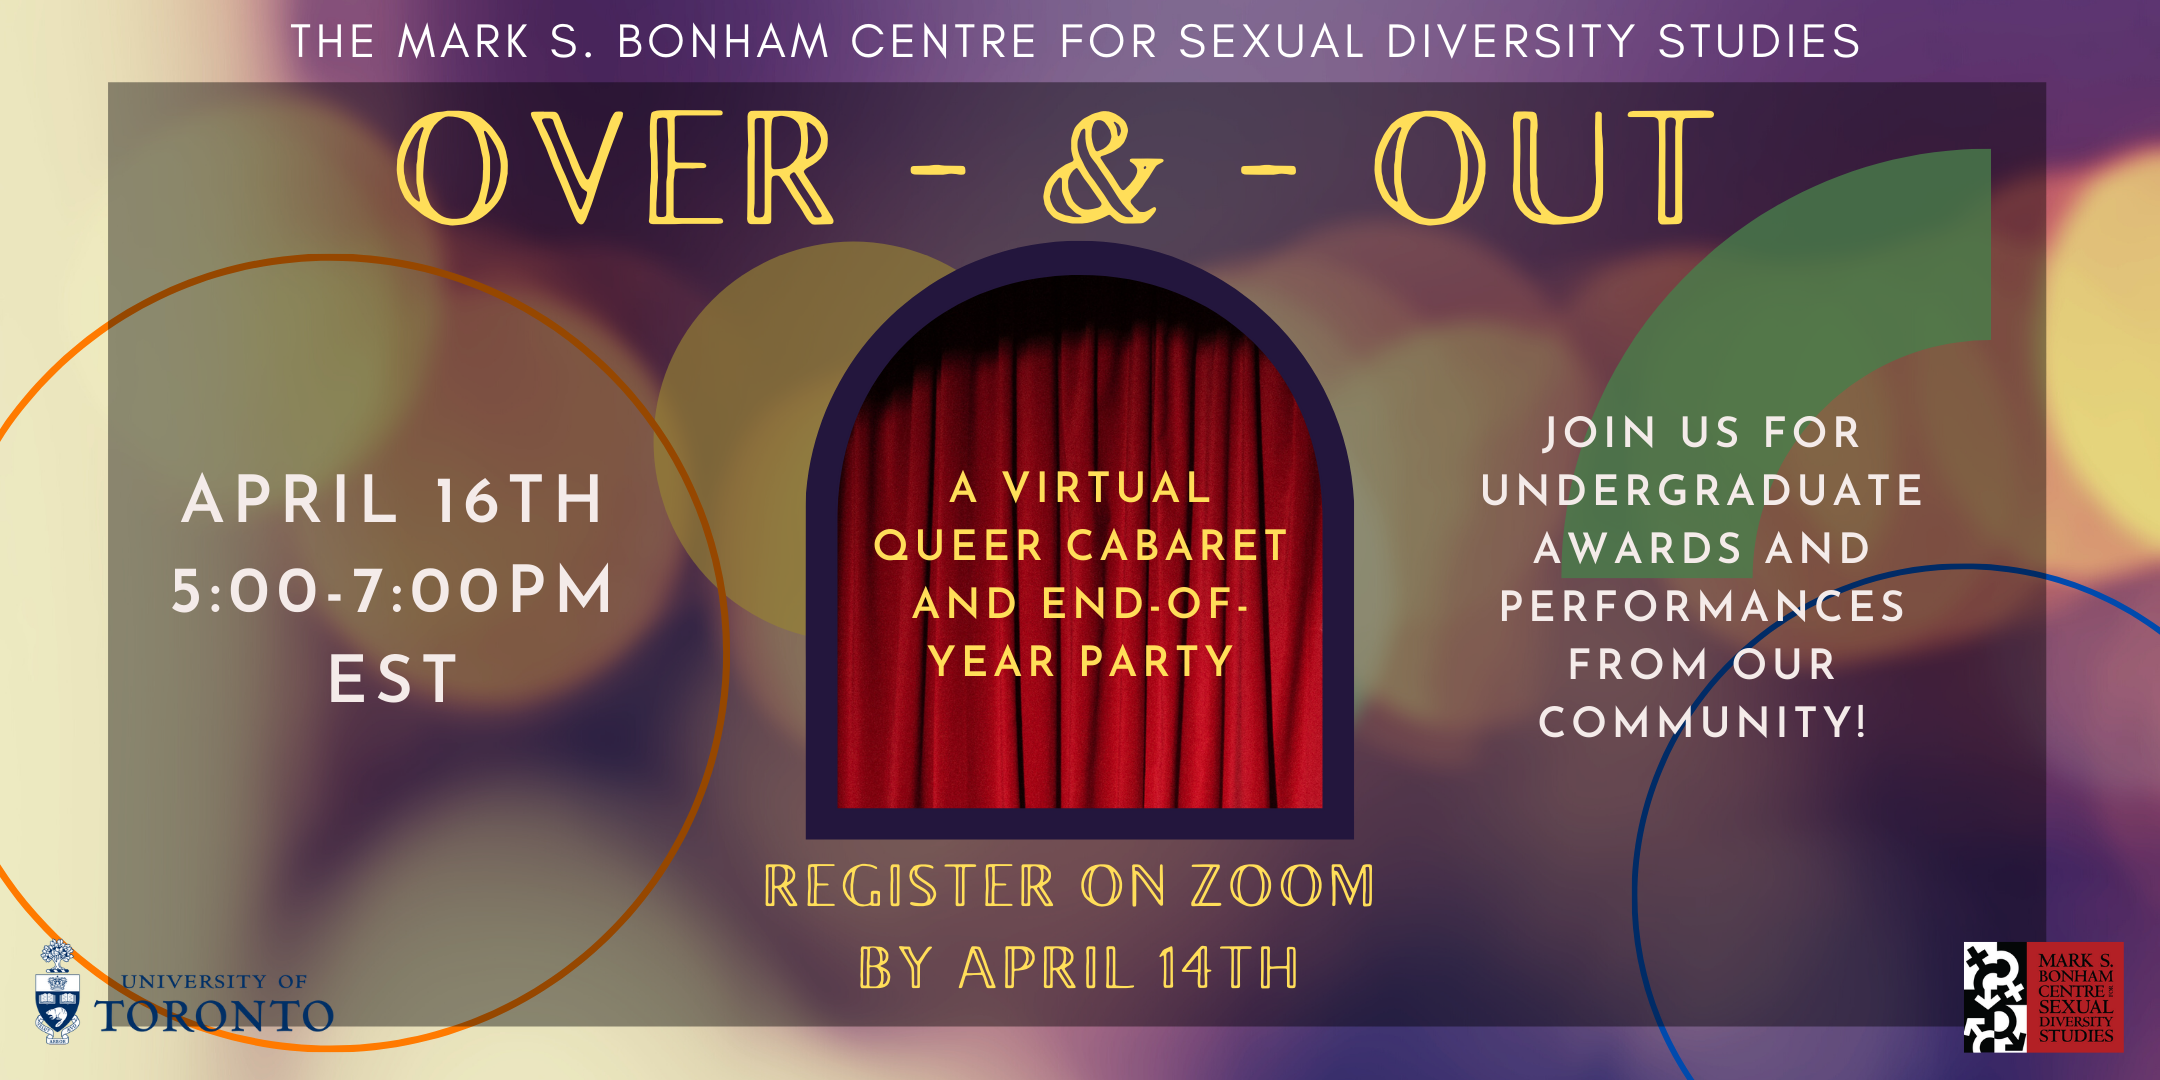 Over and Out: SDS Virtual Queer Cabaret and End-of-Year Party